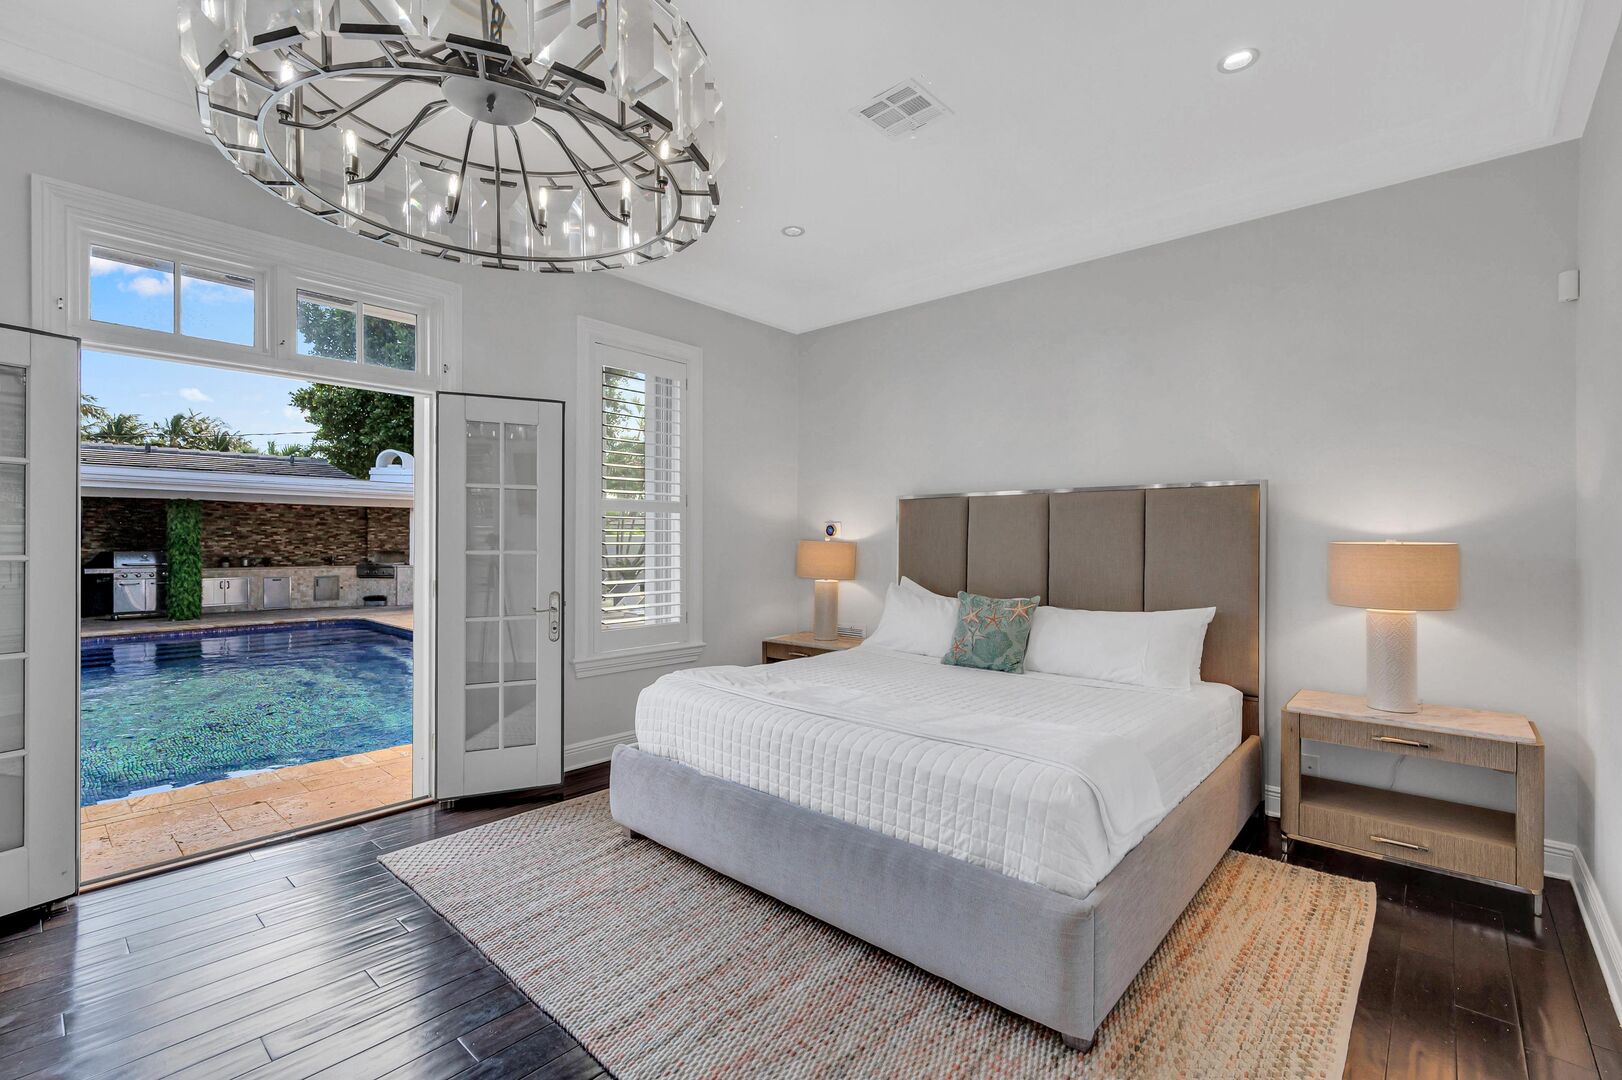 Bedroom four, featuring a king size bed and a Smart TV offers direct access to the heated pool.